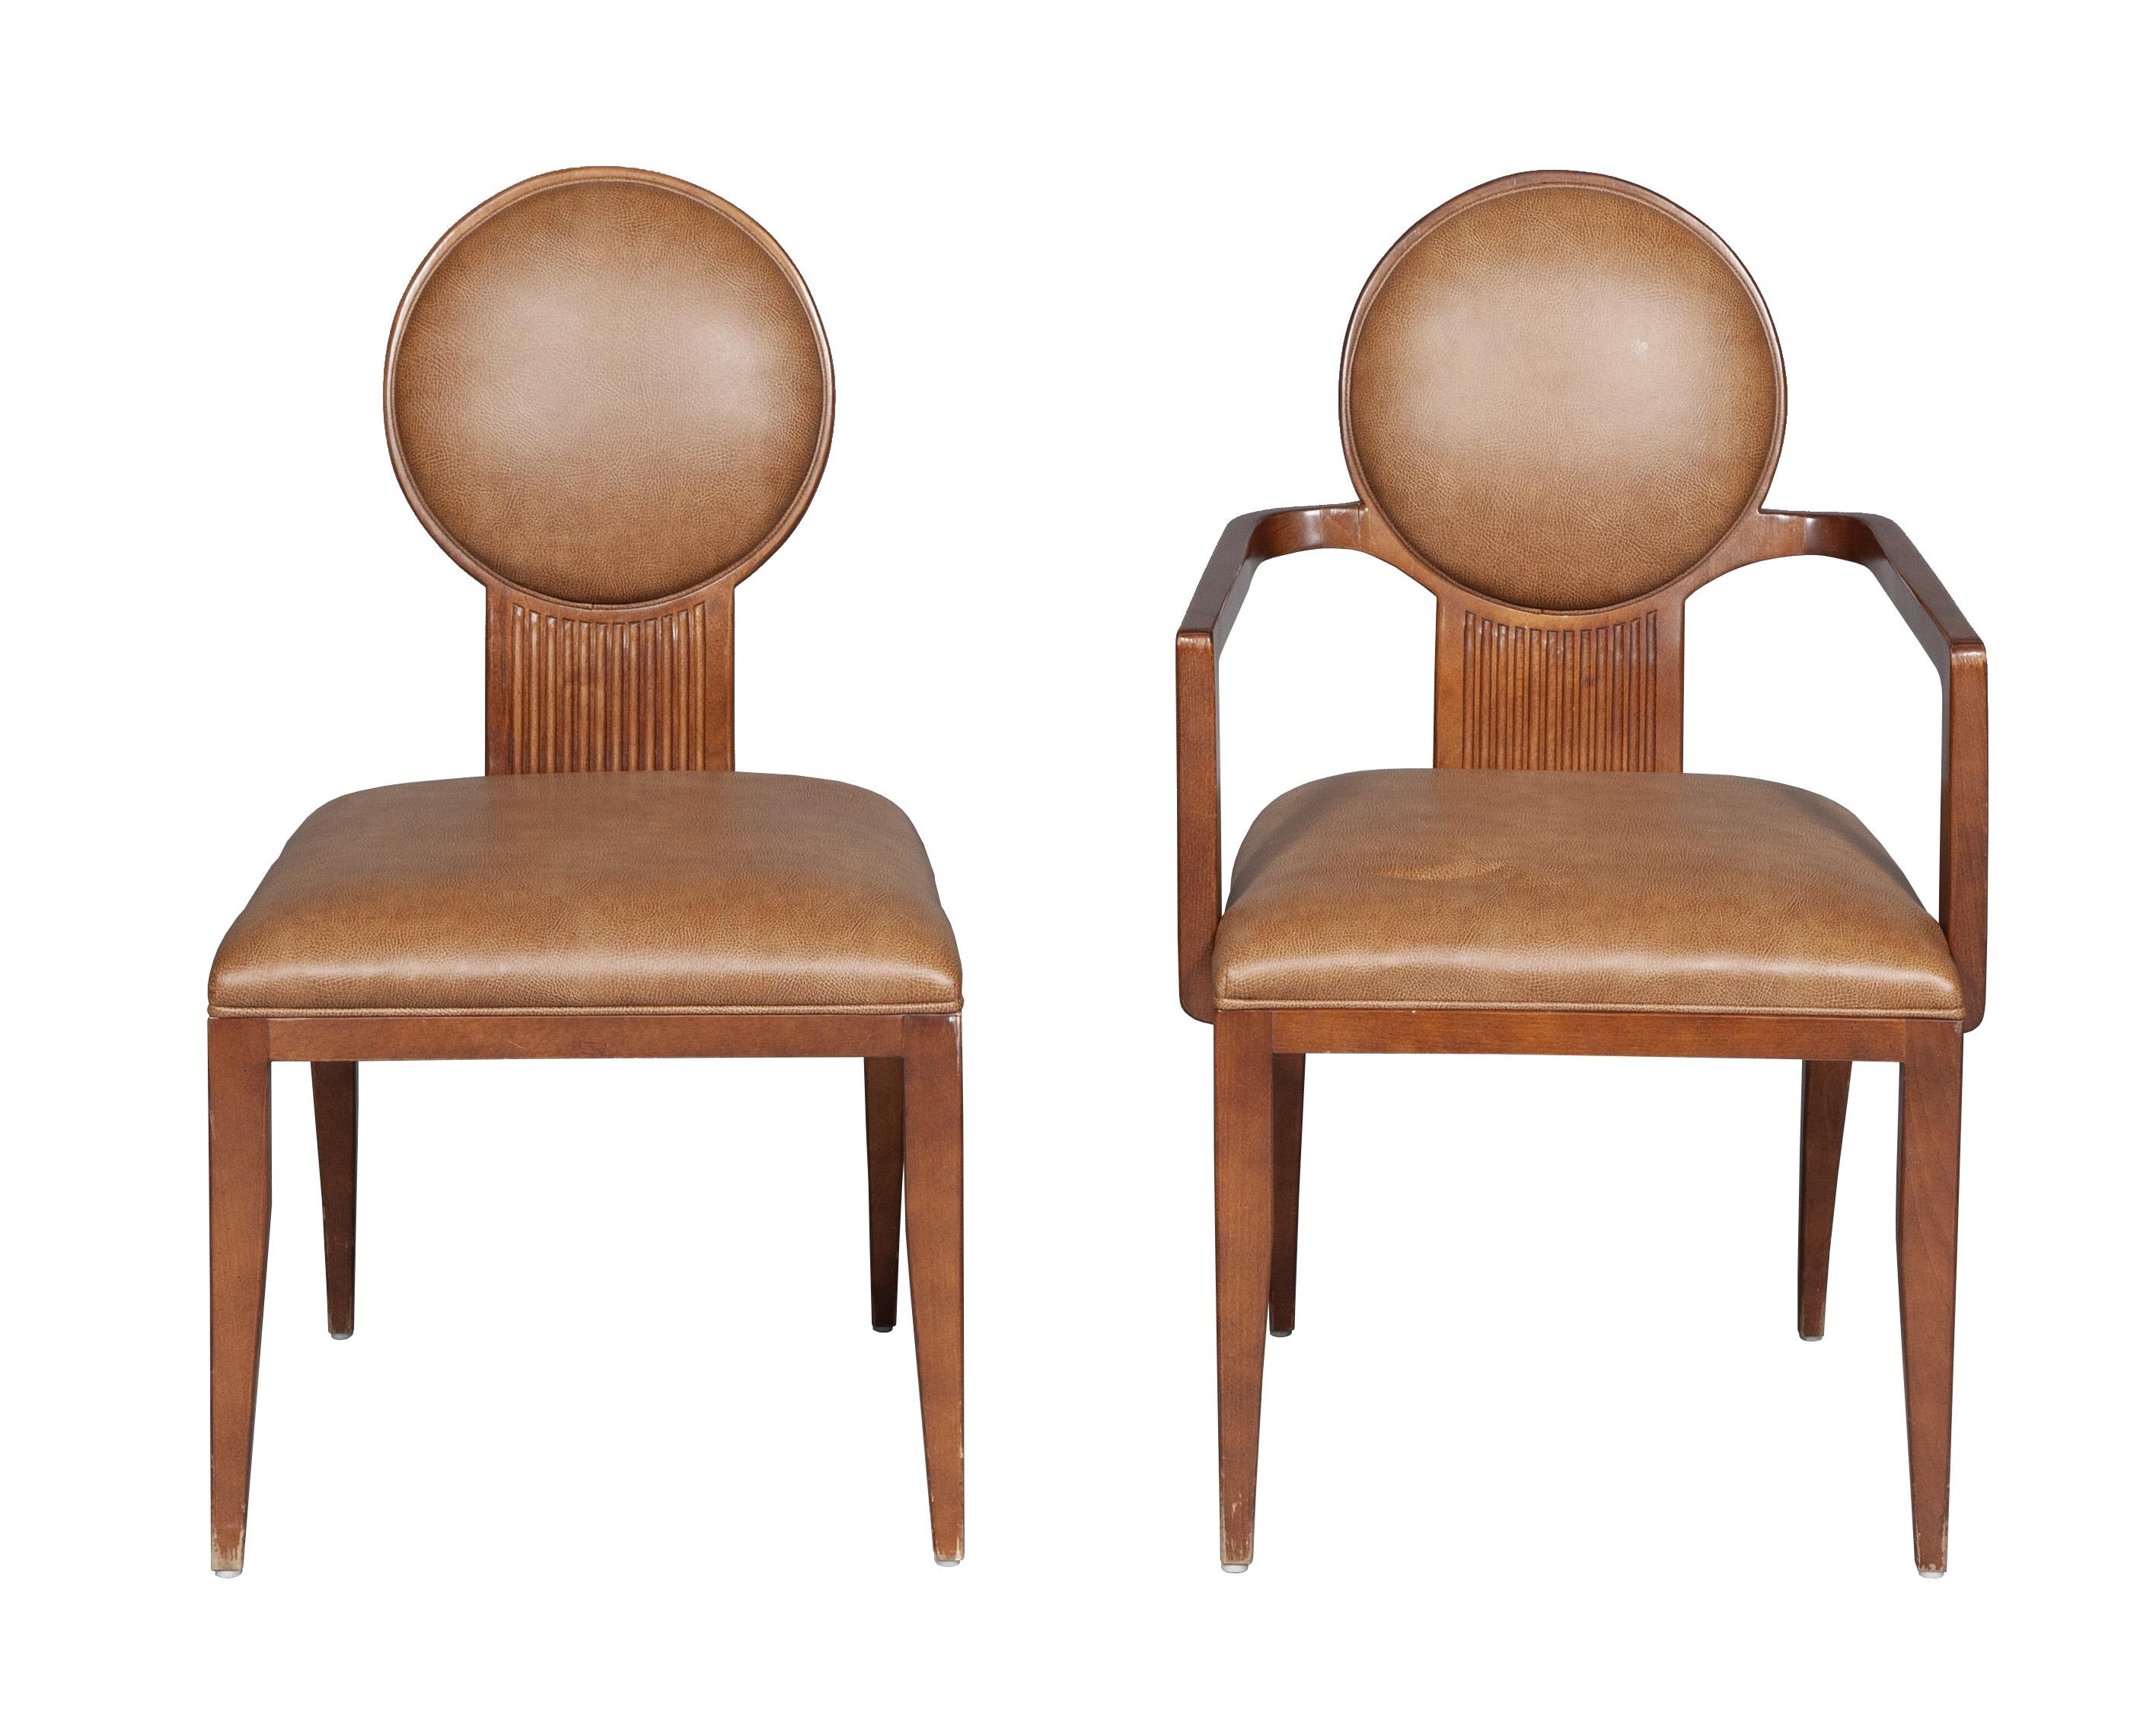 Set of seven dinnign chairs comprising a pair of armchairs and five side chairs. Design by Juan Montoya, these unique chiars have a circular faux leather upholstered backrest above a reeded splat and conforming seat, on tapered legs. 

Armchair